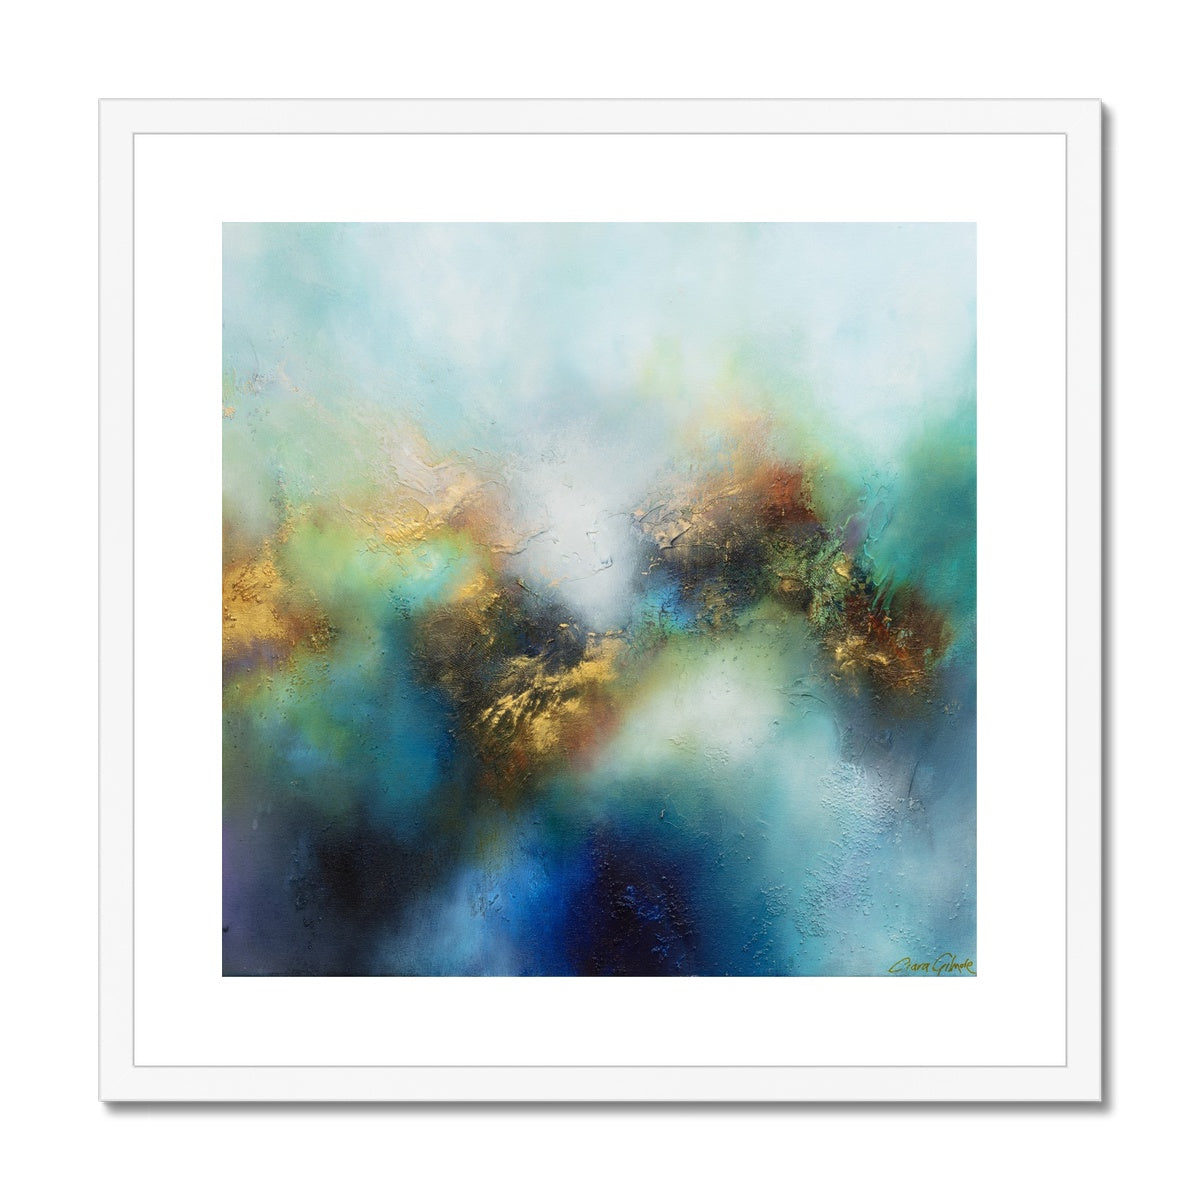 Drifting into Love Framed & Mounted Print